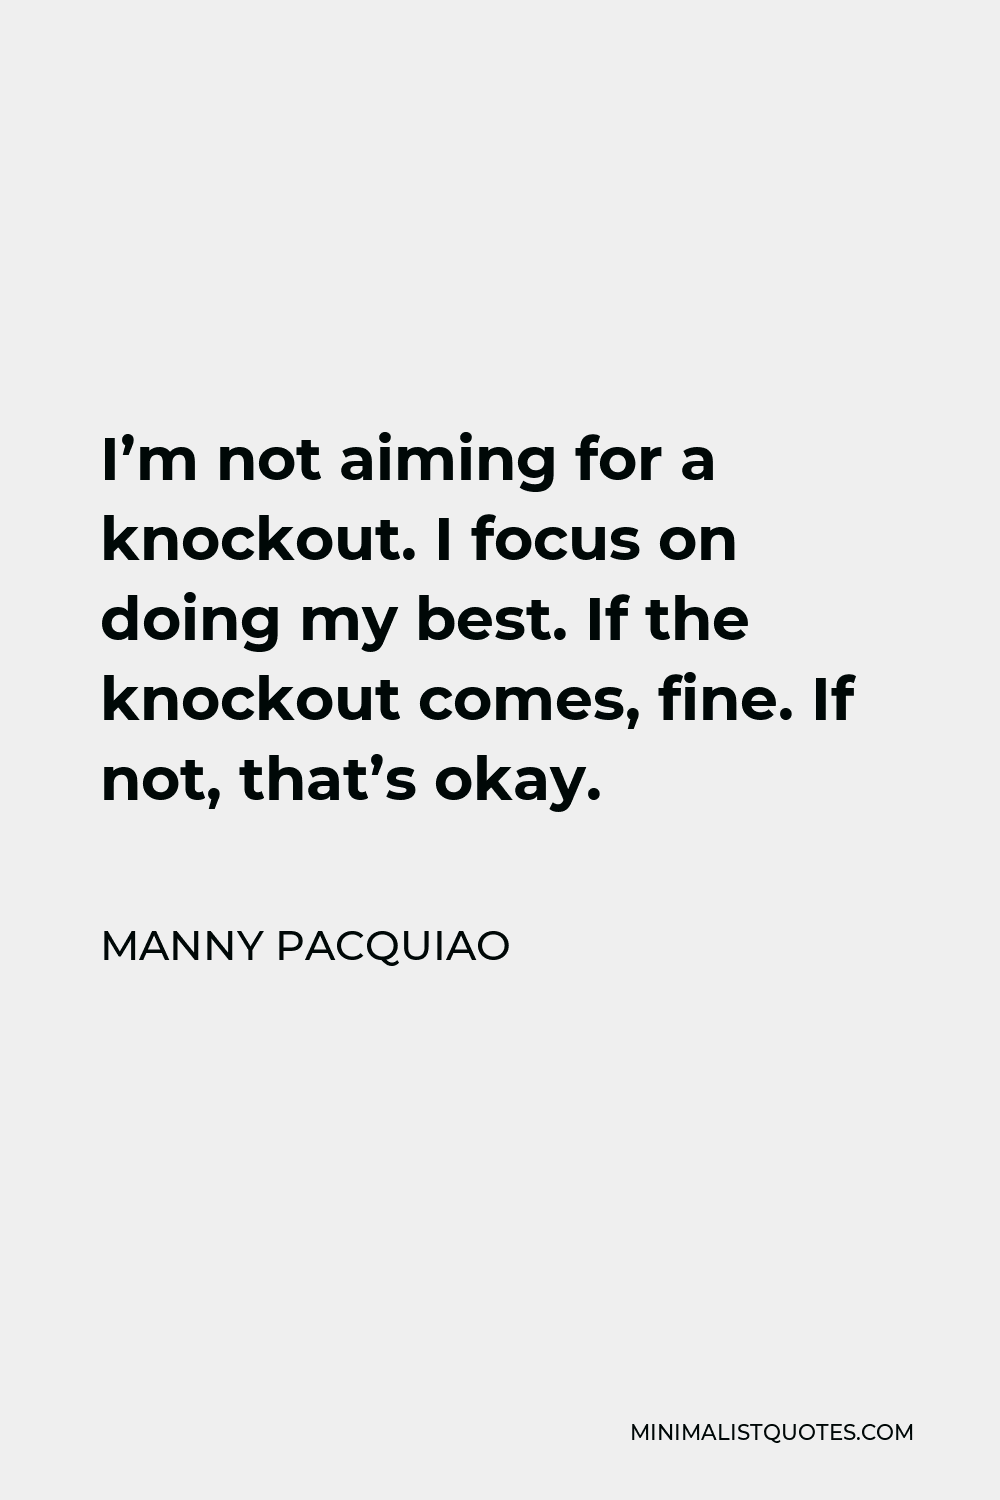 Manny Pacquiao Quote - I’m not aiming for a knockout. I focus on doing my best. If the knockout comes, fine. If not, that’s okay.